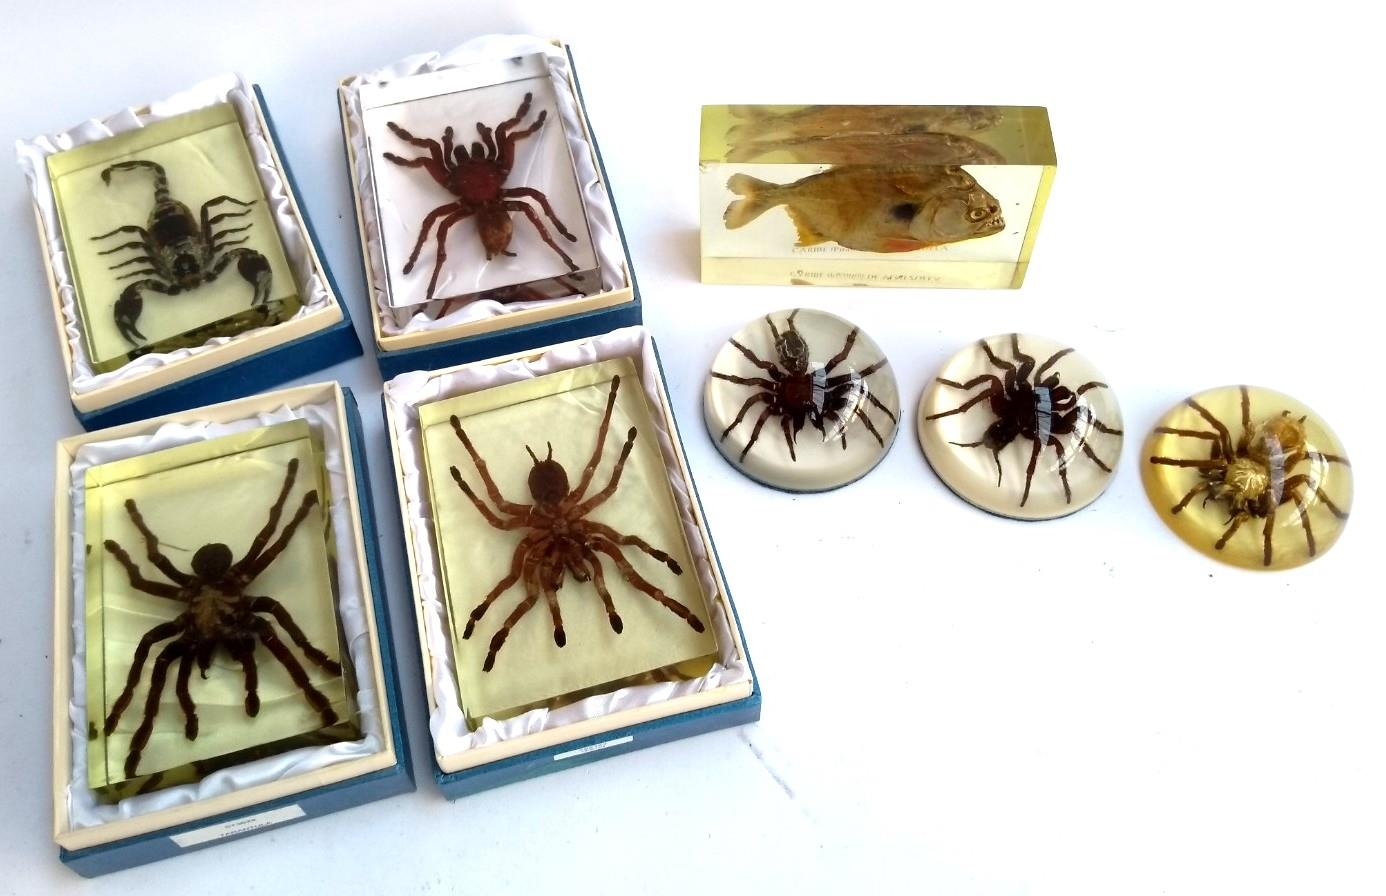 Six resin tarantula paperweights, together with one piranha paperweight and a scorpion